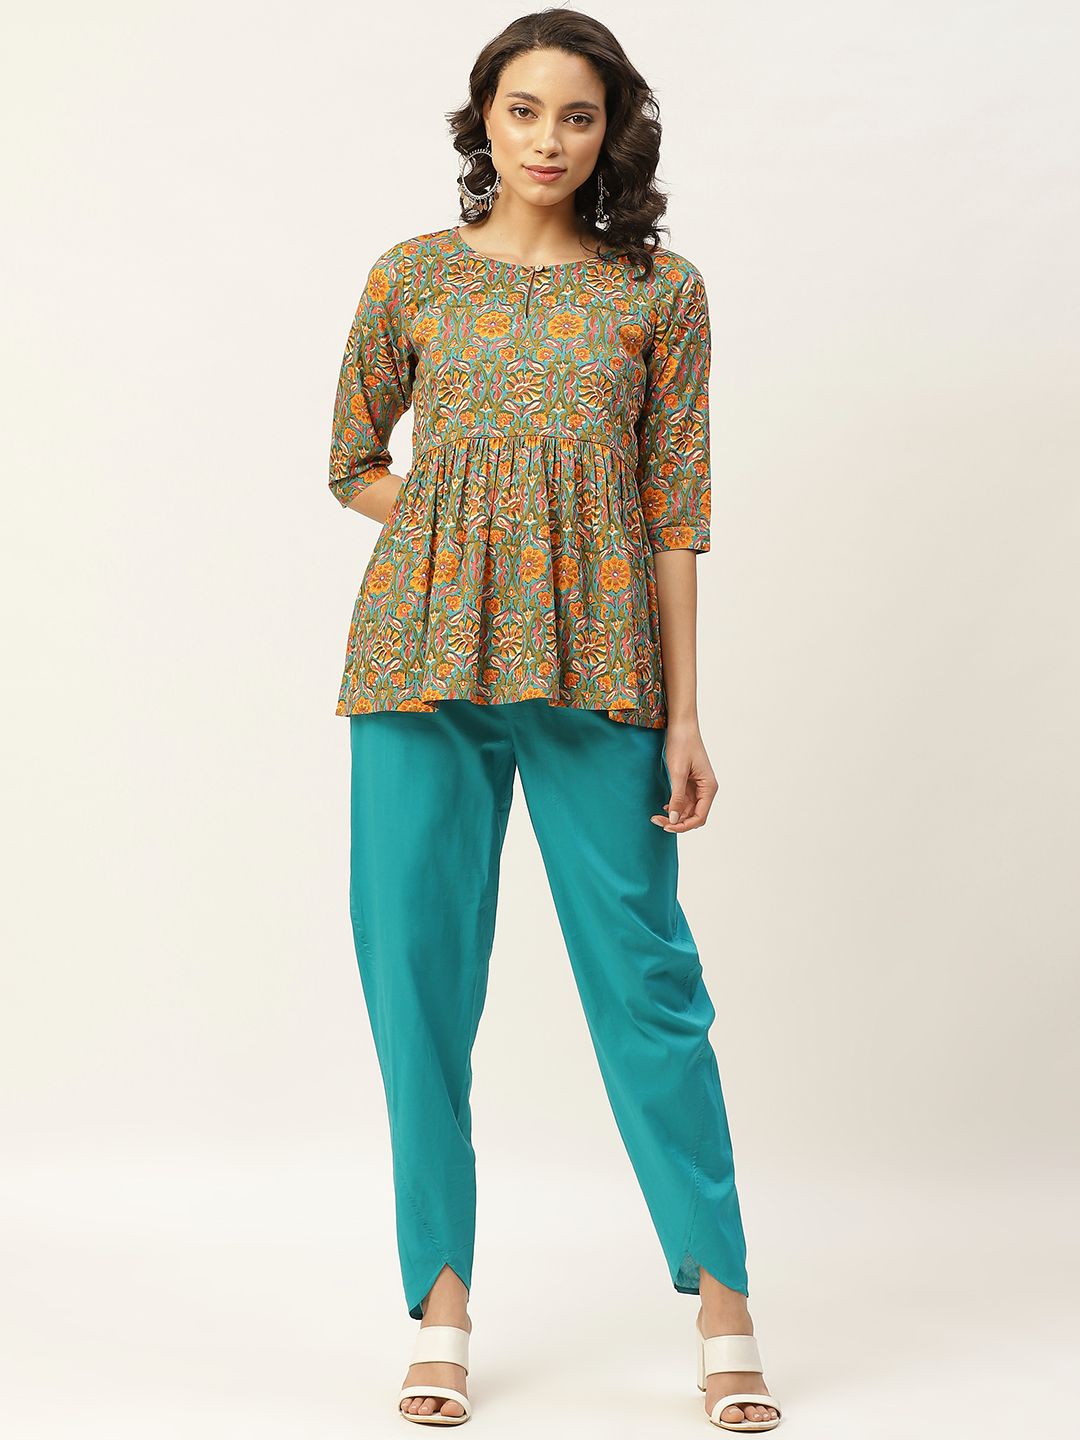 Shae by SASSAFRAS Women Teal Green & Coral Orange Cotton Printed A-line Top with Trousers Price in India